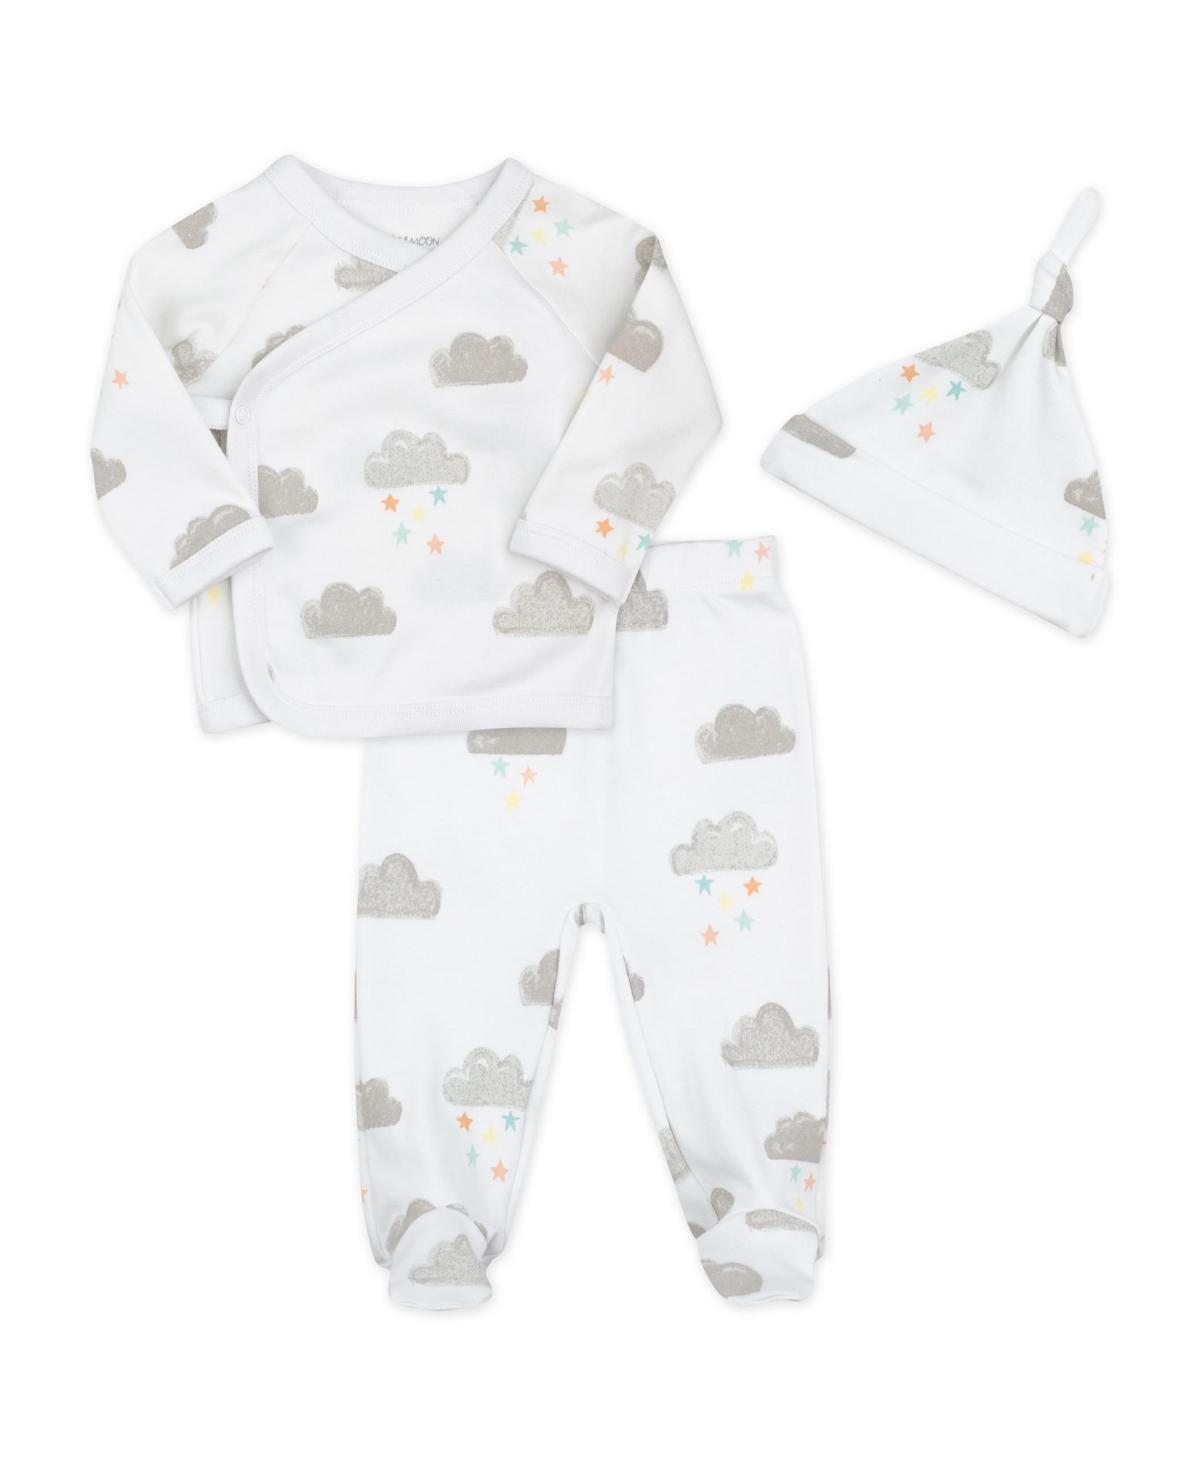 Mac & Moon Baby Neutral Cotton Take Me Home Top, Cap And Pants, 3 Piece Set In White